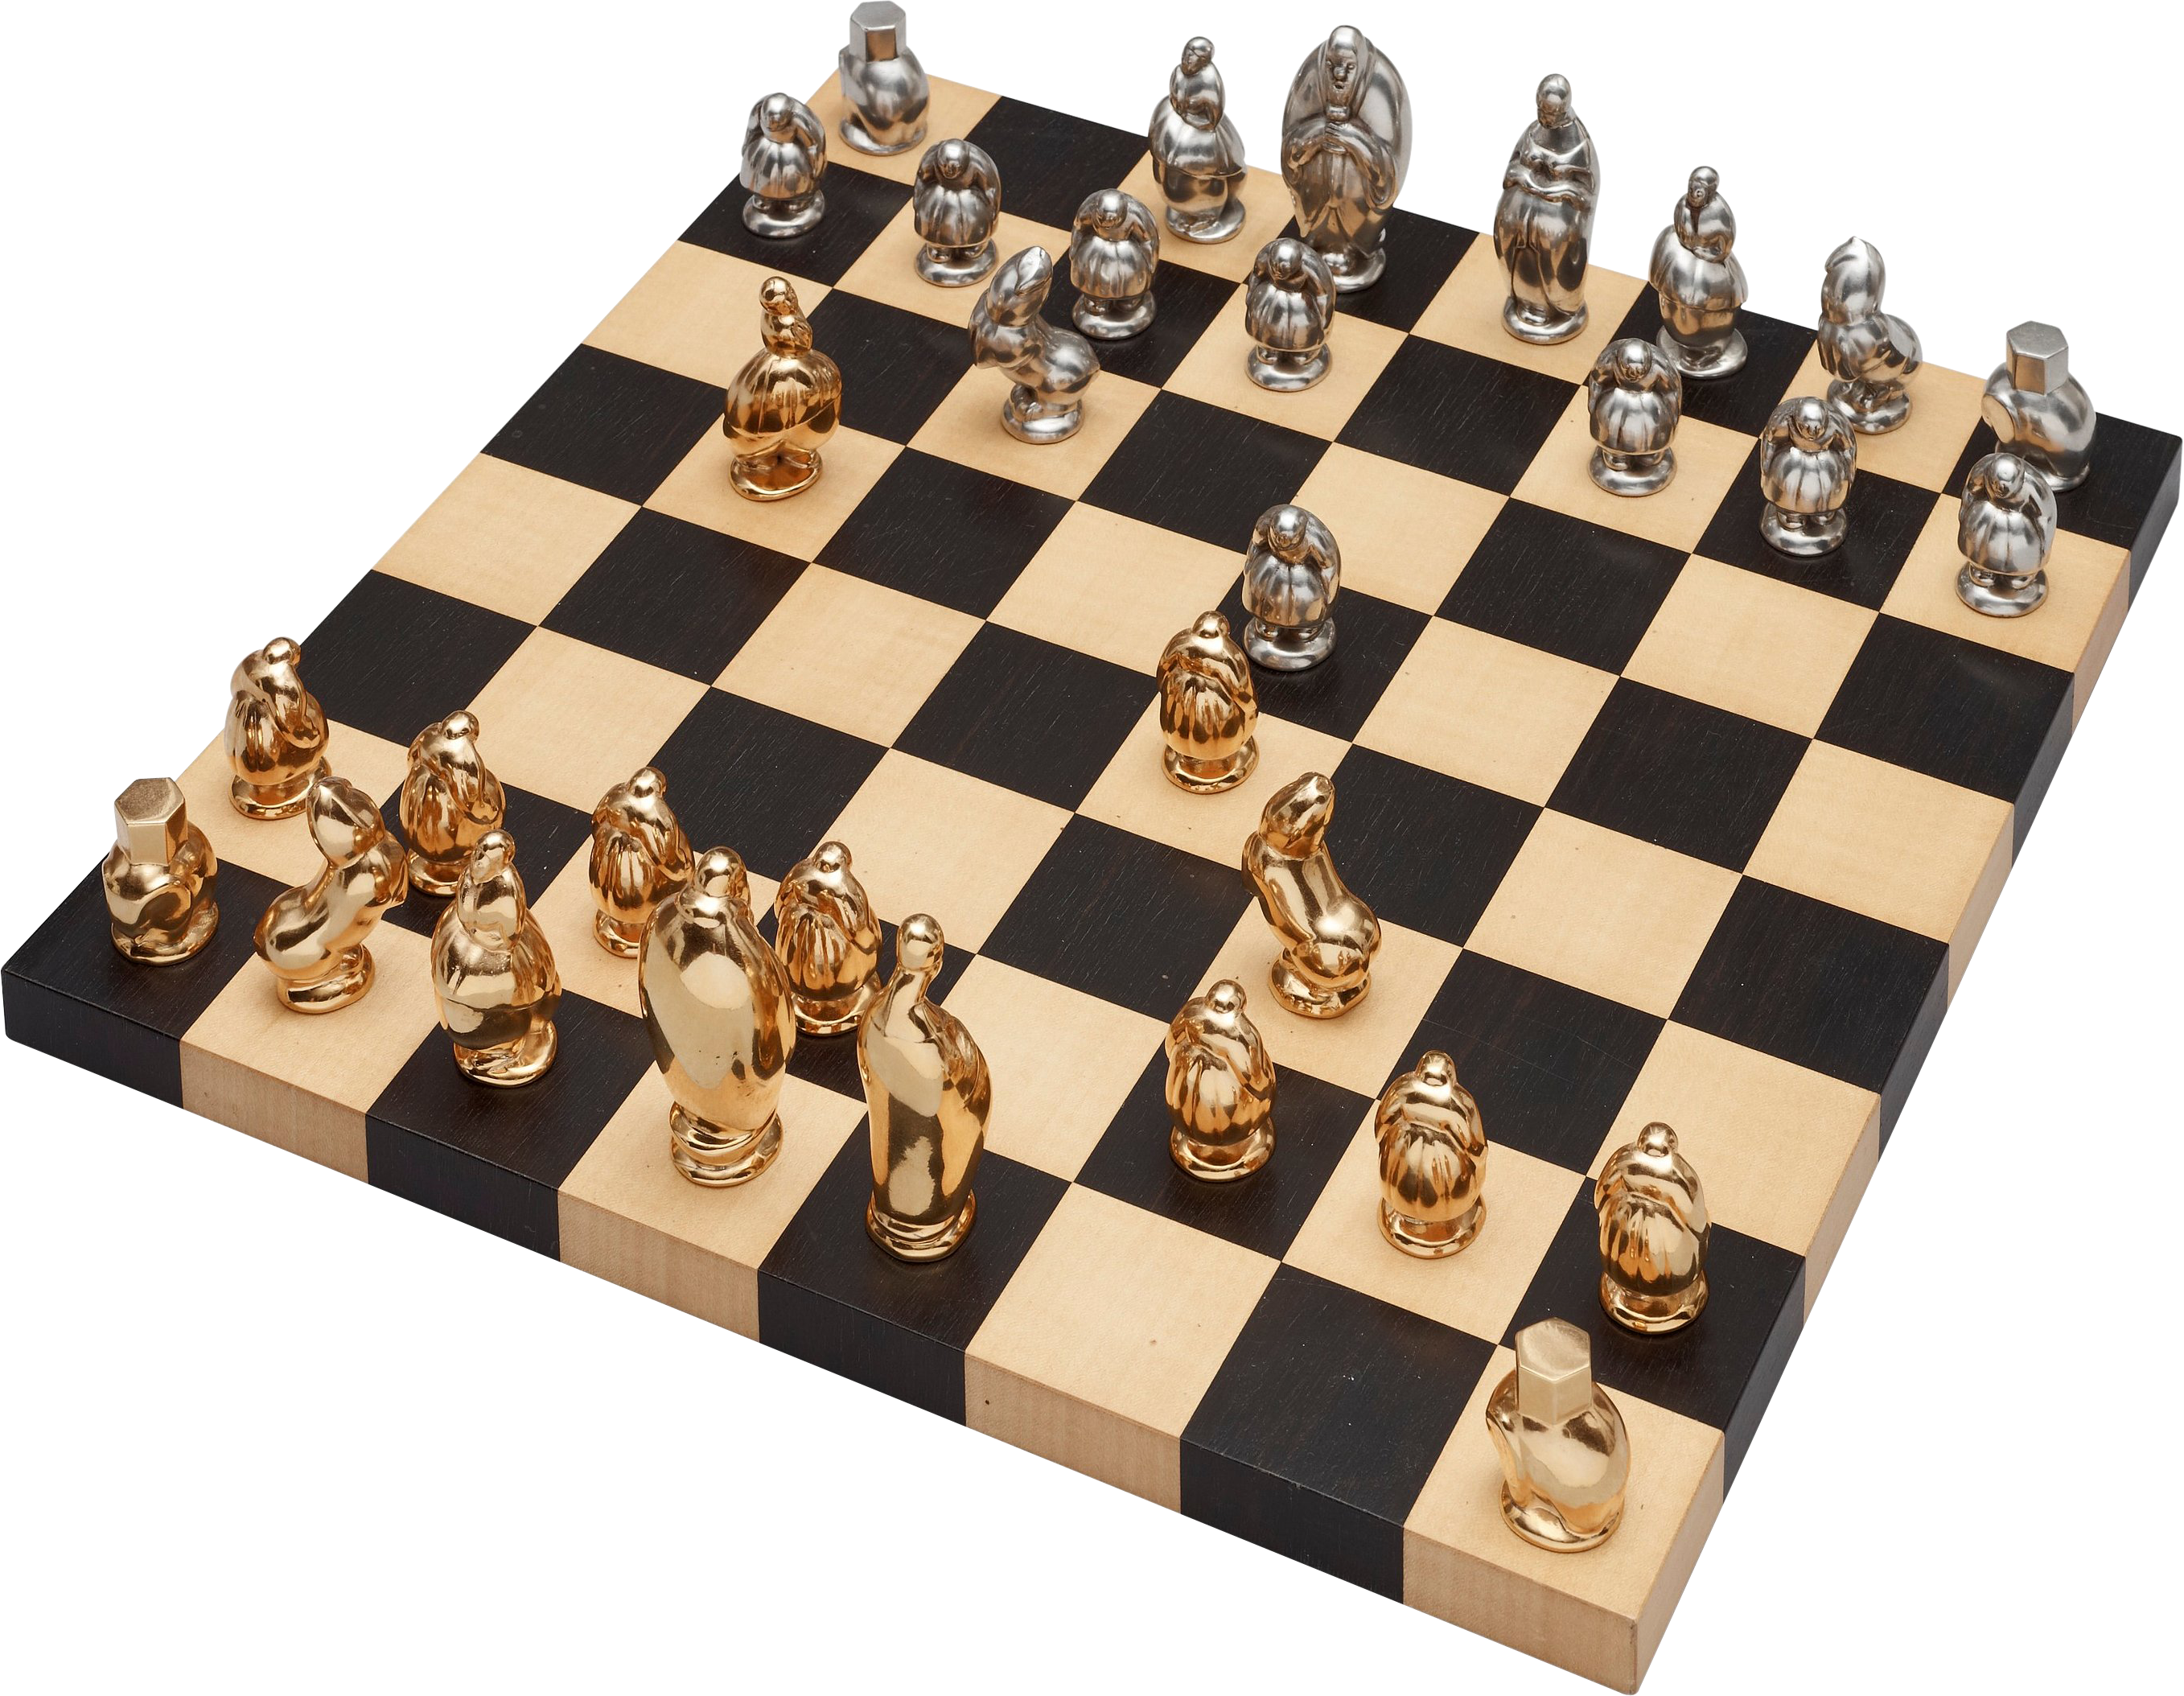 Chess png images